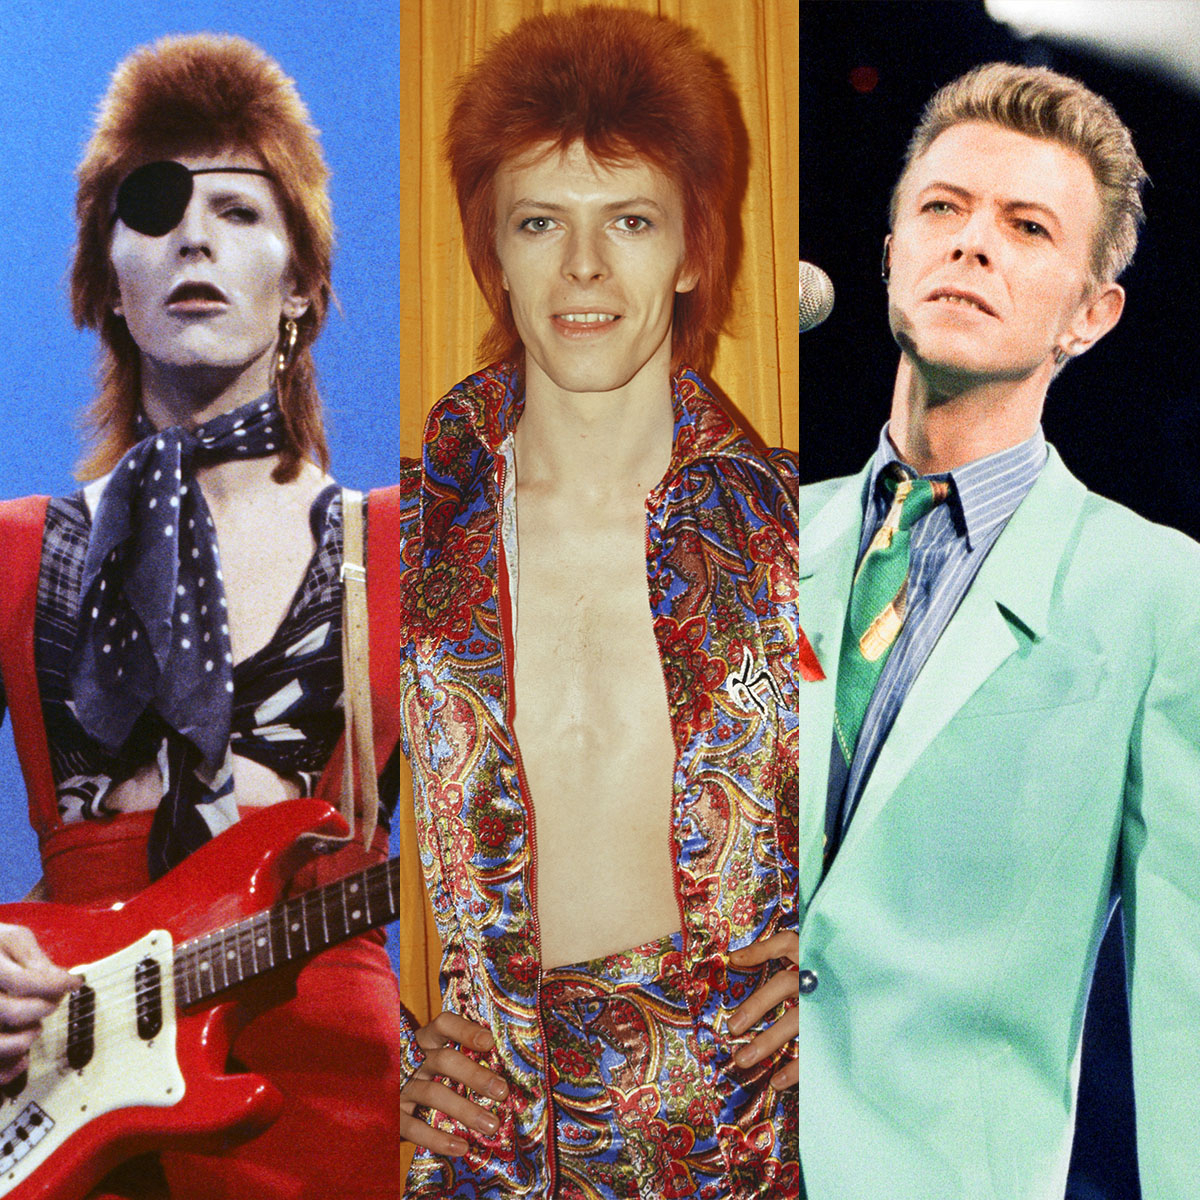 David Bowie News, Pictures, and Videos - E! Online